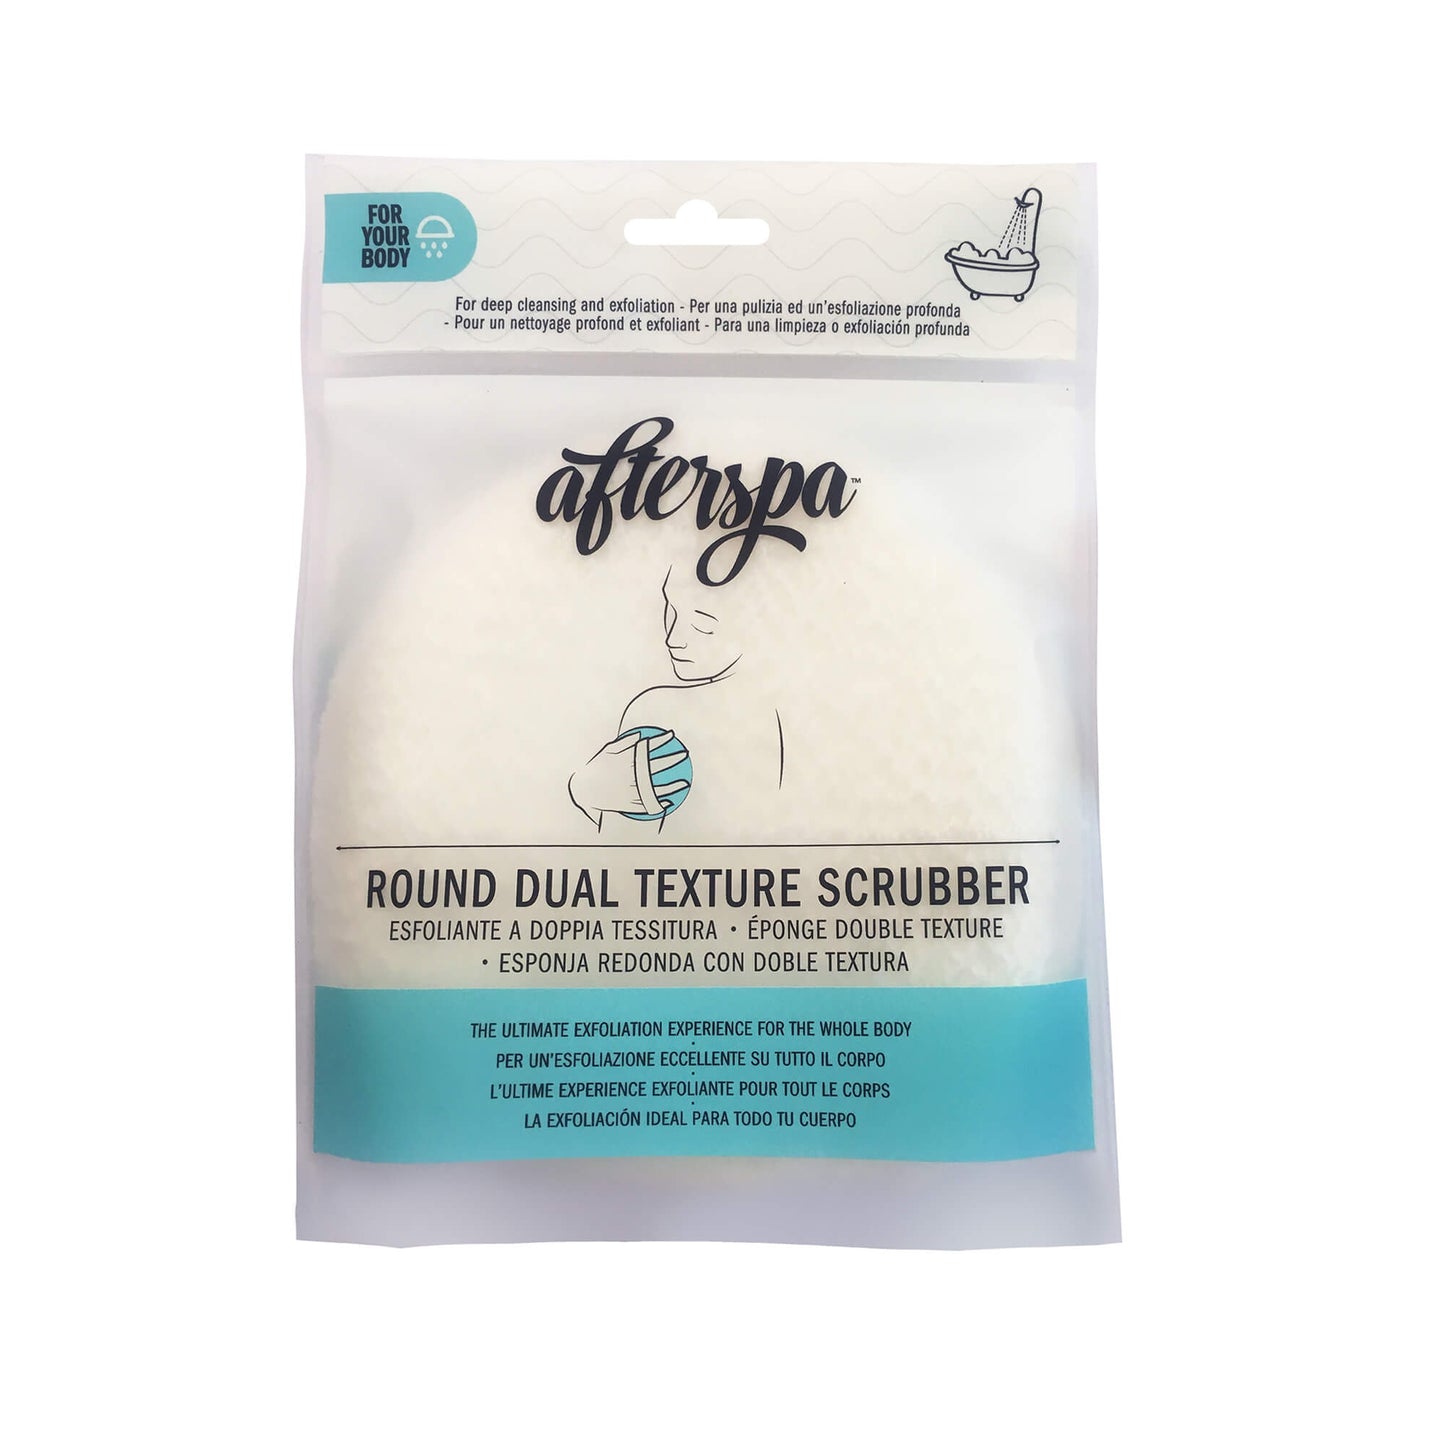 Round Dual Texture Scrubber - Afterspa -  Spa experience at home